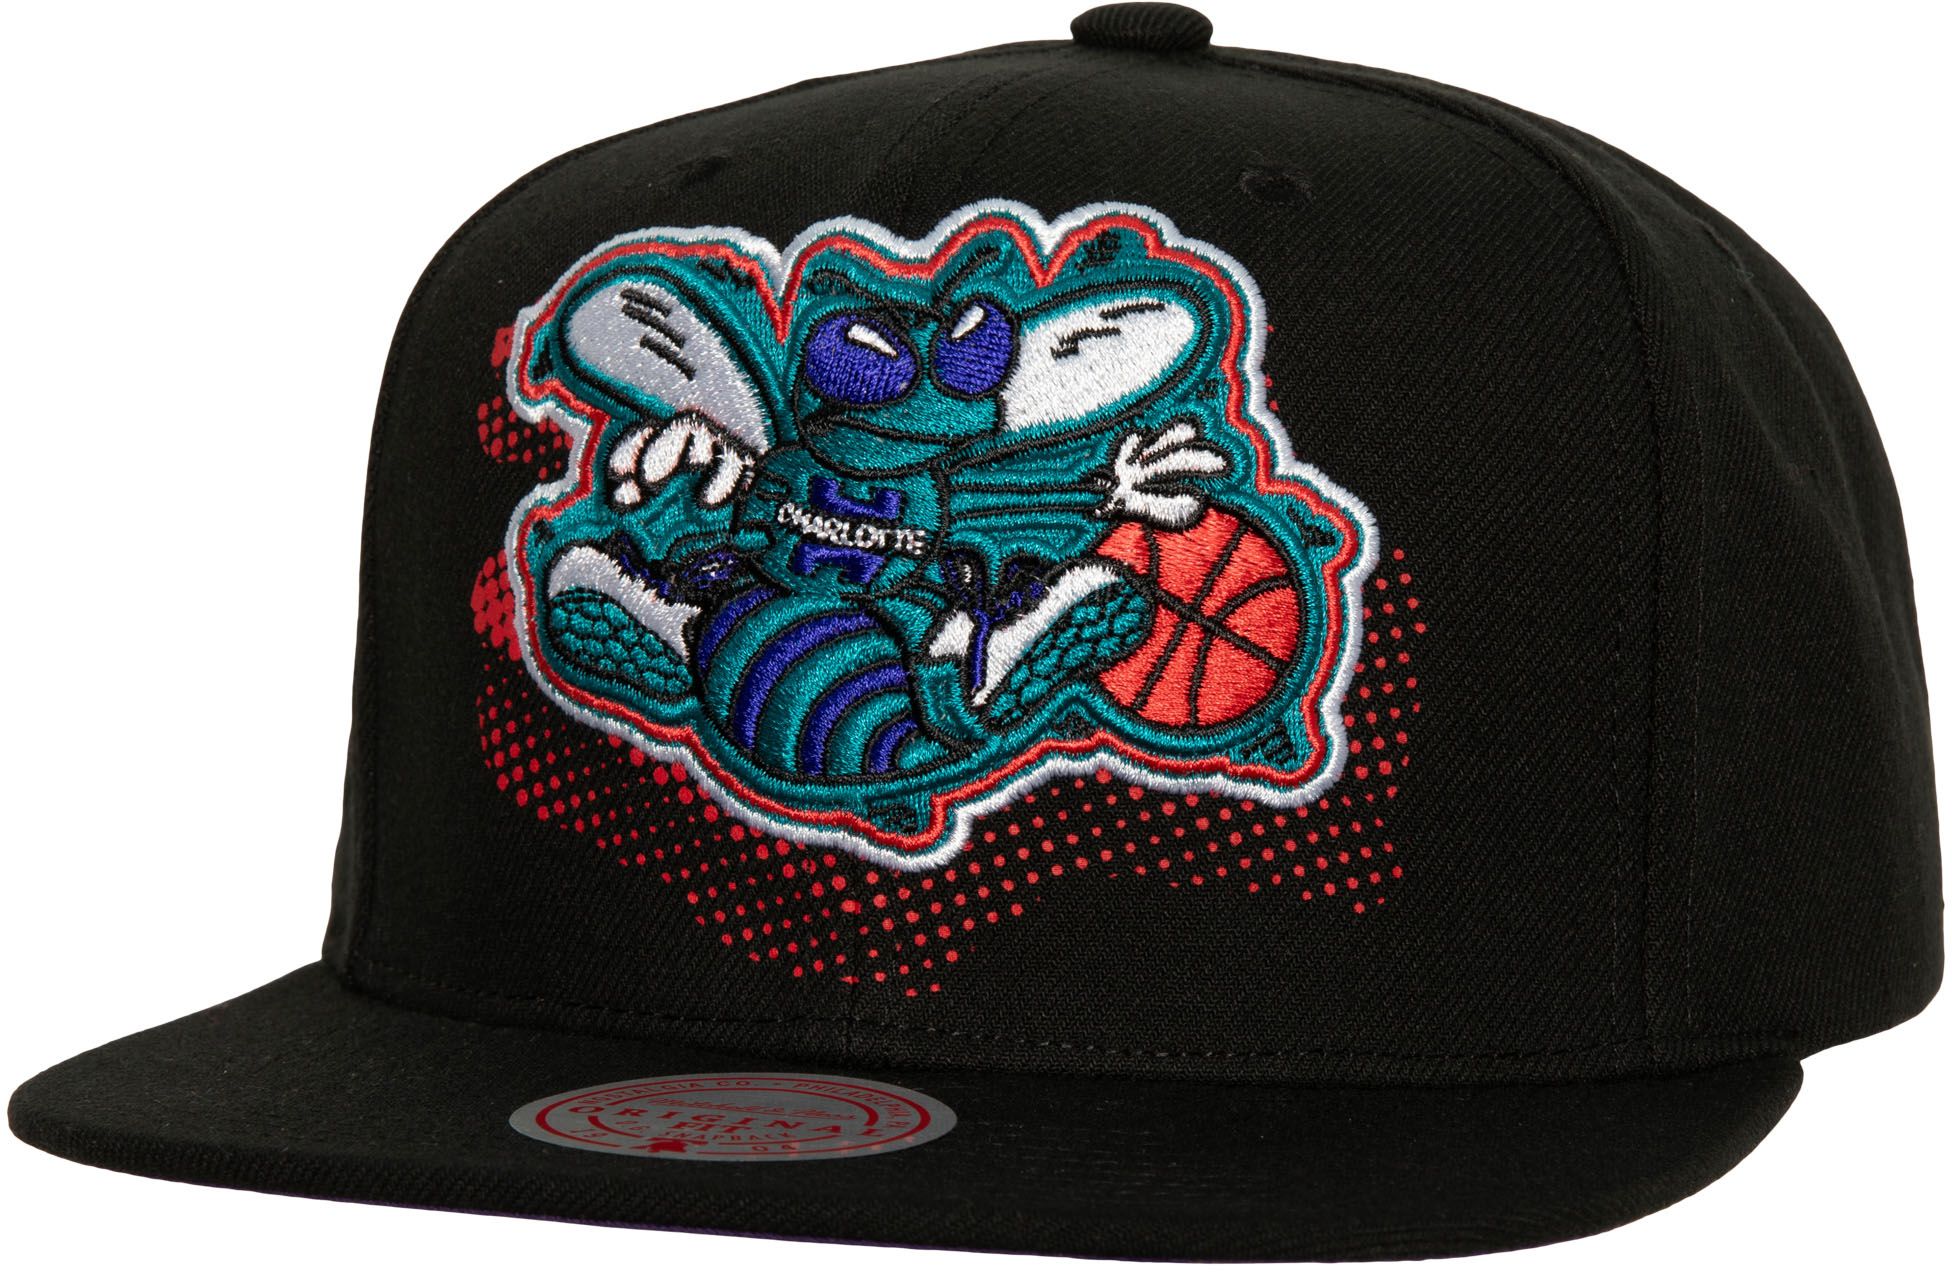 MITCHELL & NESS MITCHELL AND NESS ADULT CHARLOTTE HORNETS BIG FACE ADJUSTABLE SNAPBACK HAT INTERNATIONAL SHIPPING